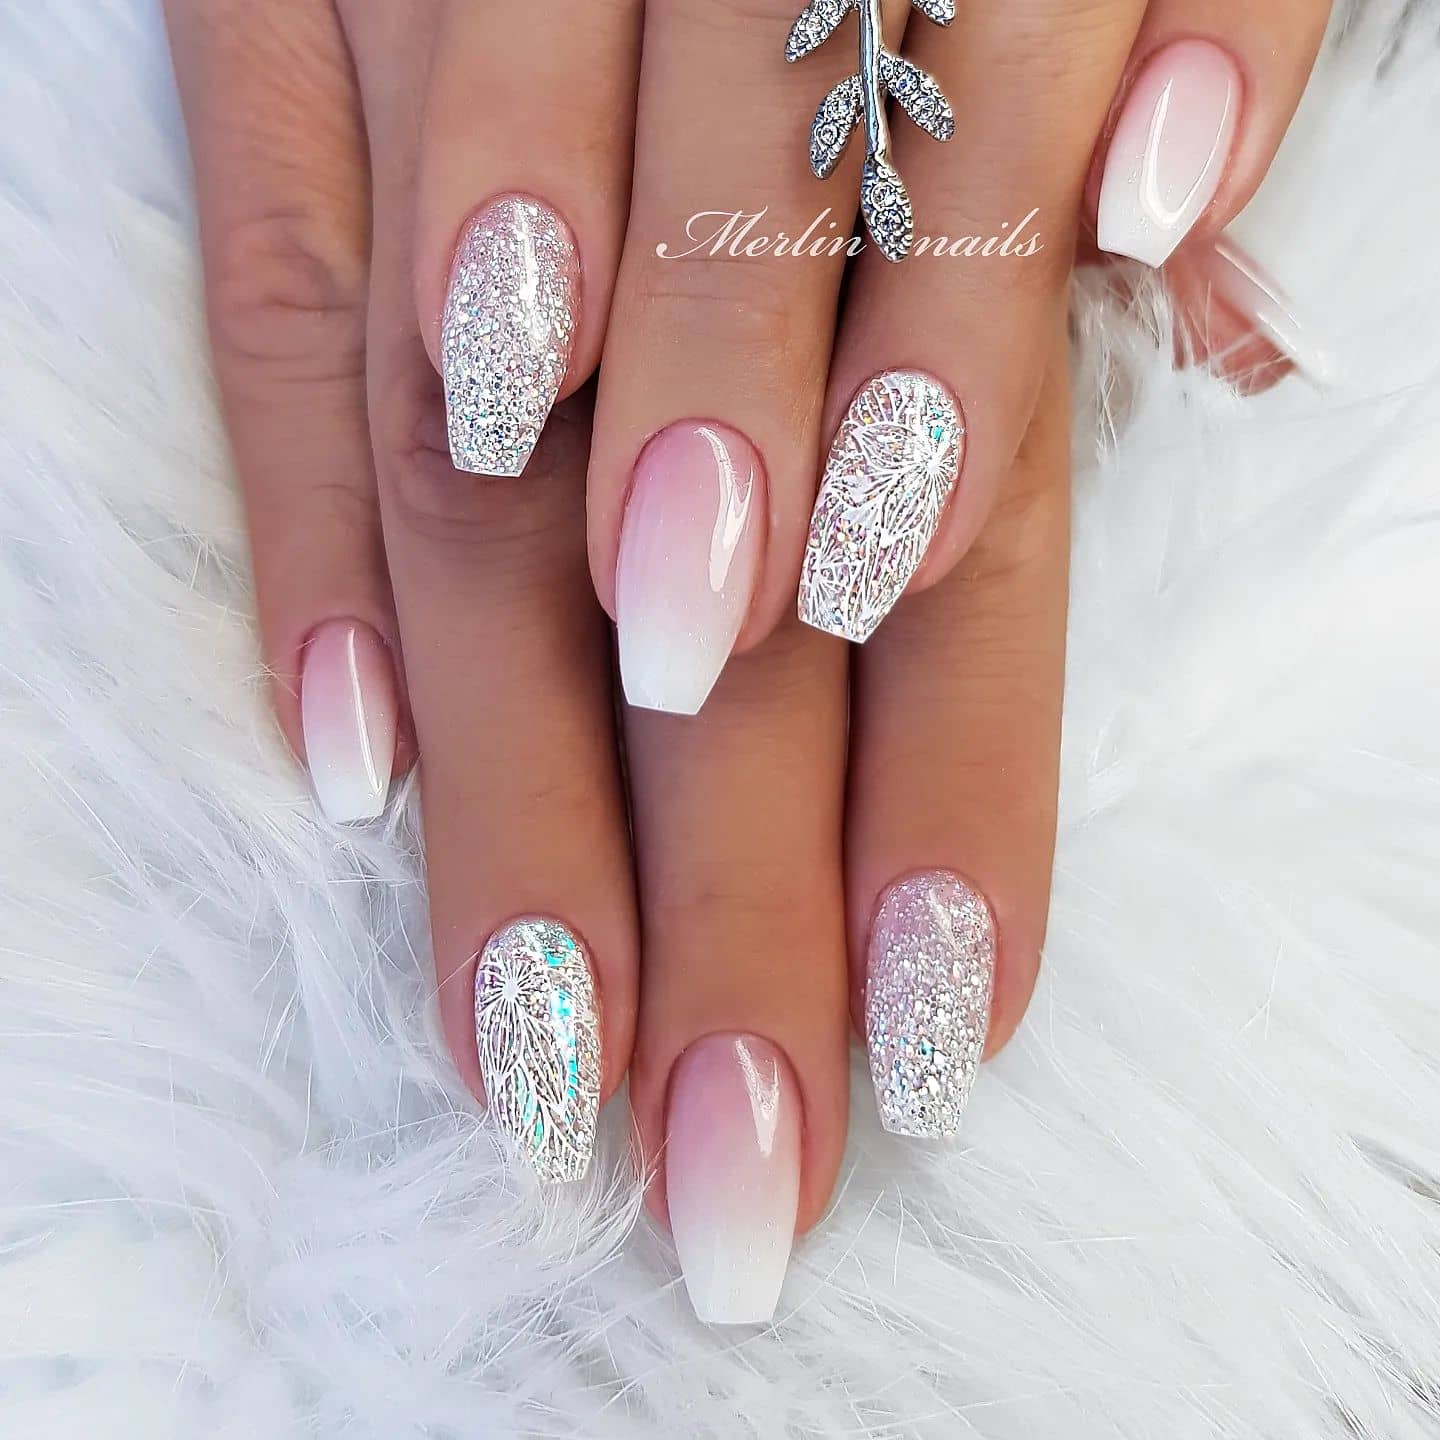 Over 100 Bright Summer Nail Art Designs That Will Be So Trendy images 101